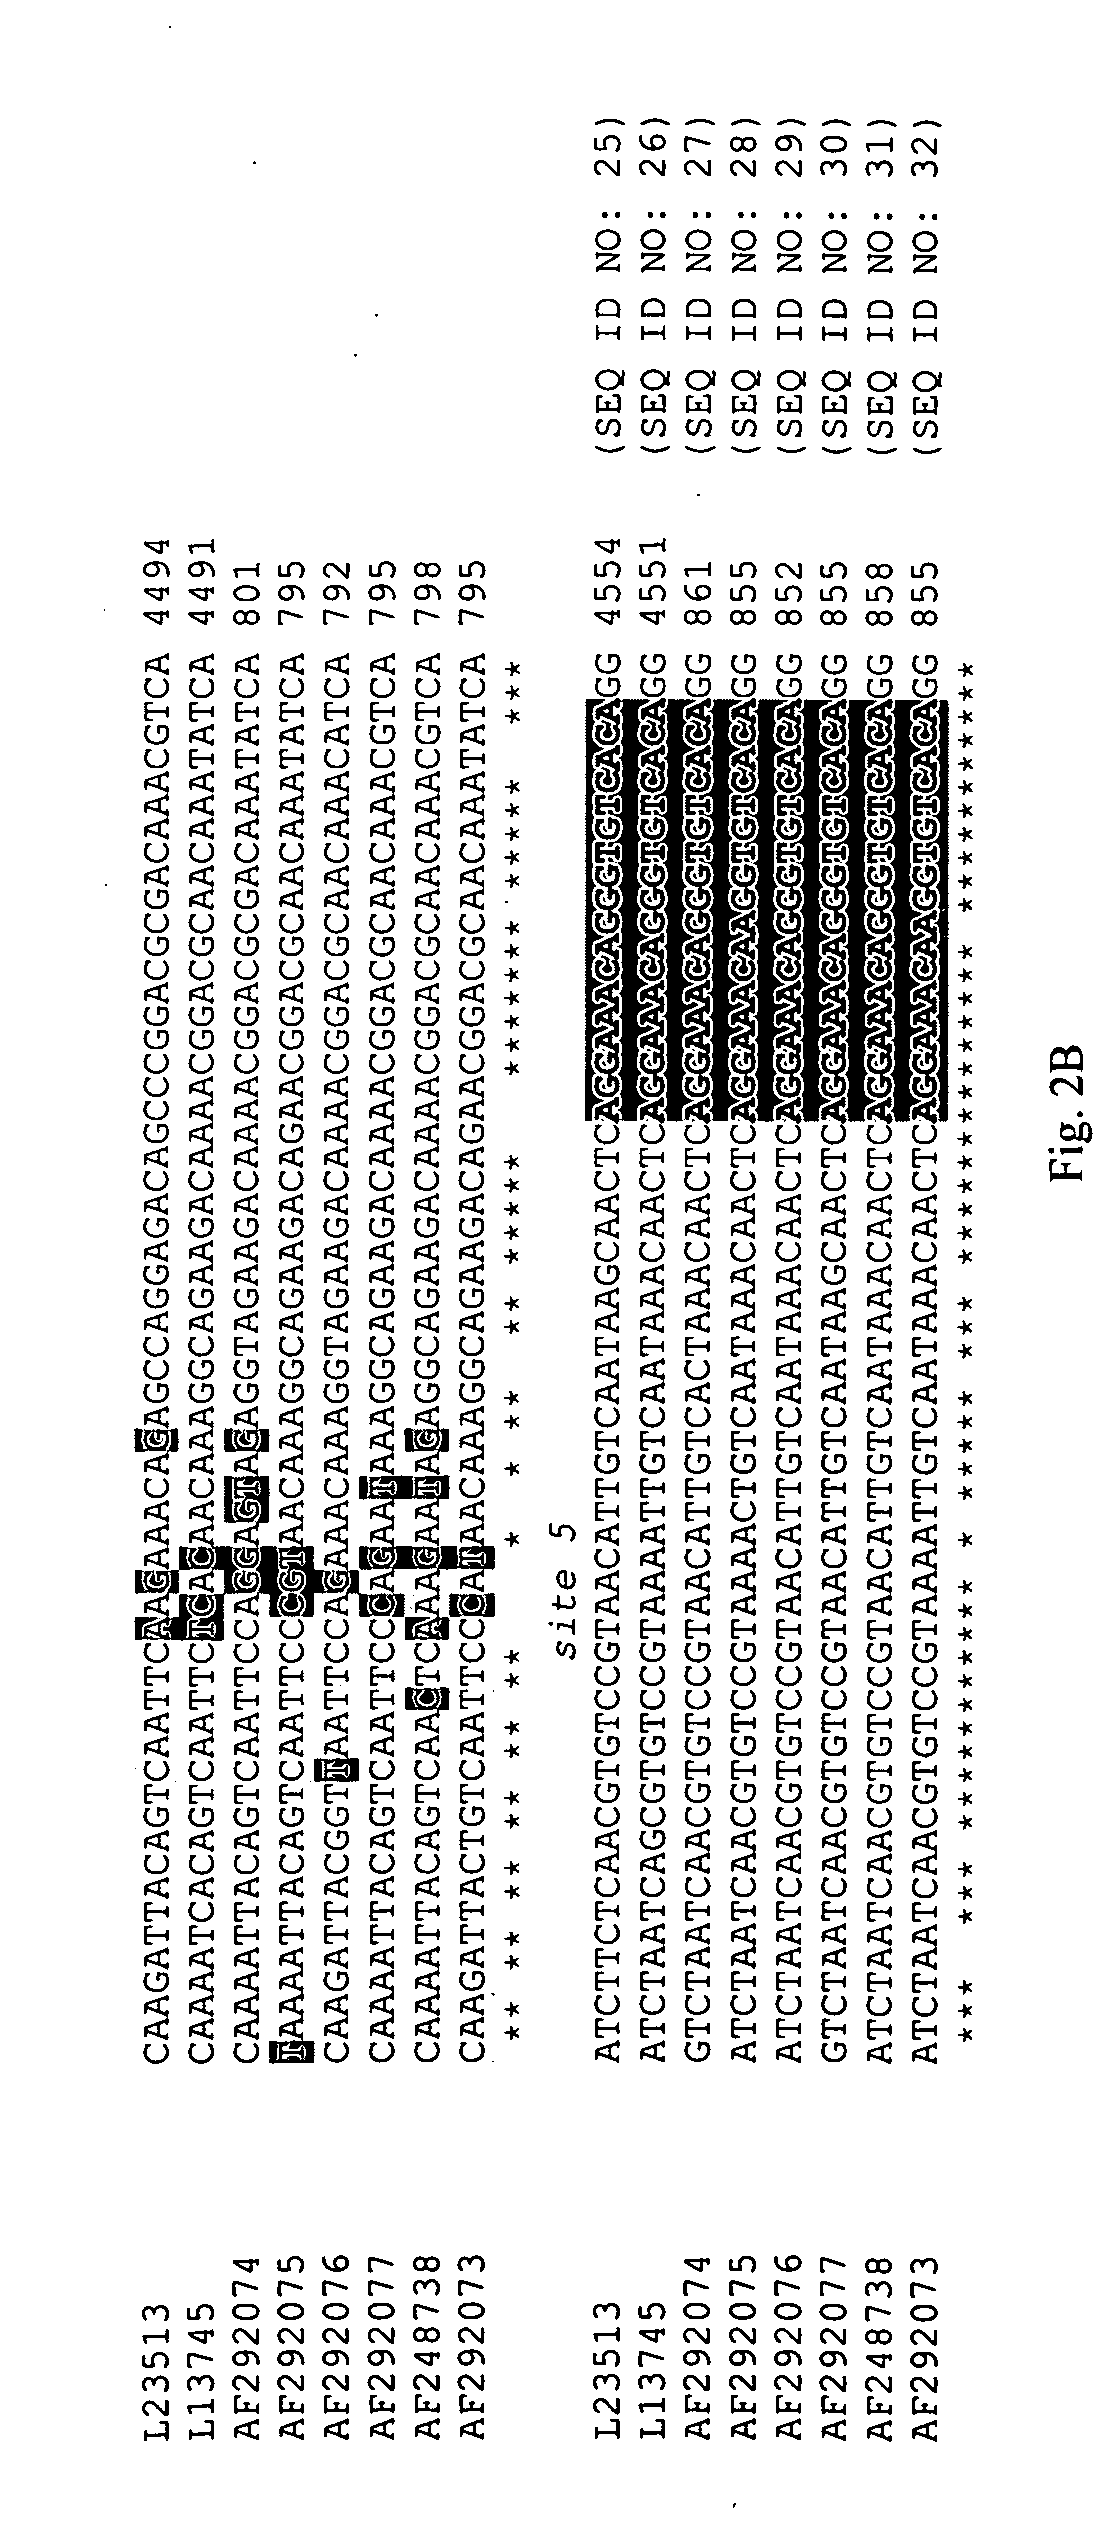 Methods and microarrays for detecting enteric viruses